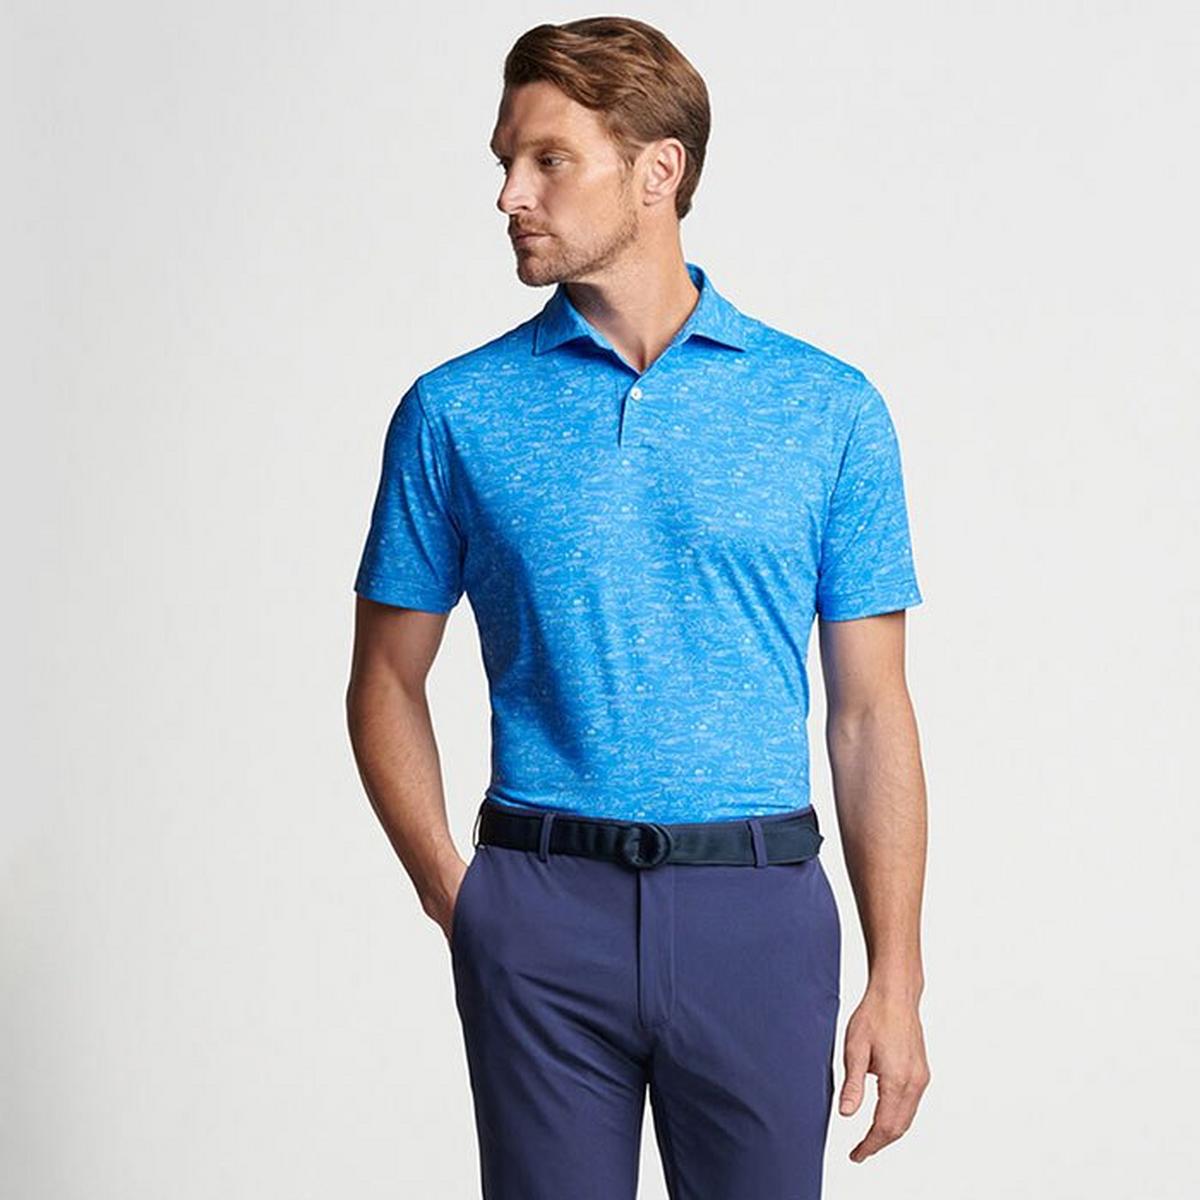 Men's Pacific Performance Jersey Polo